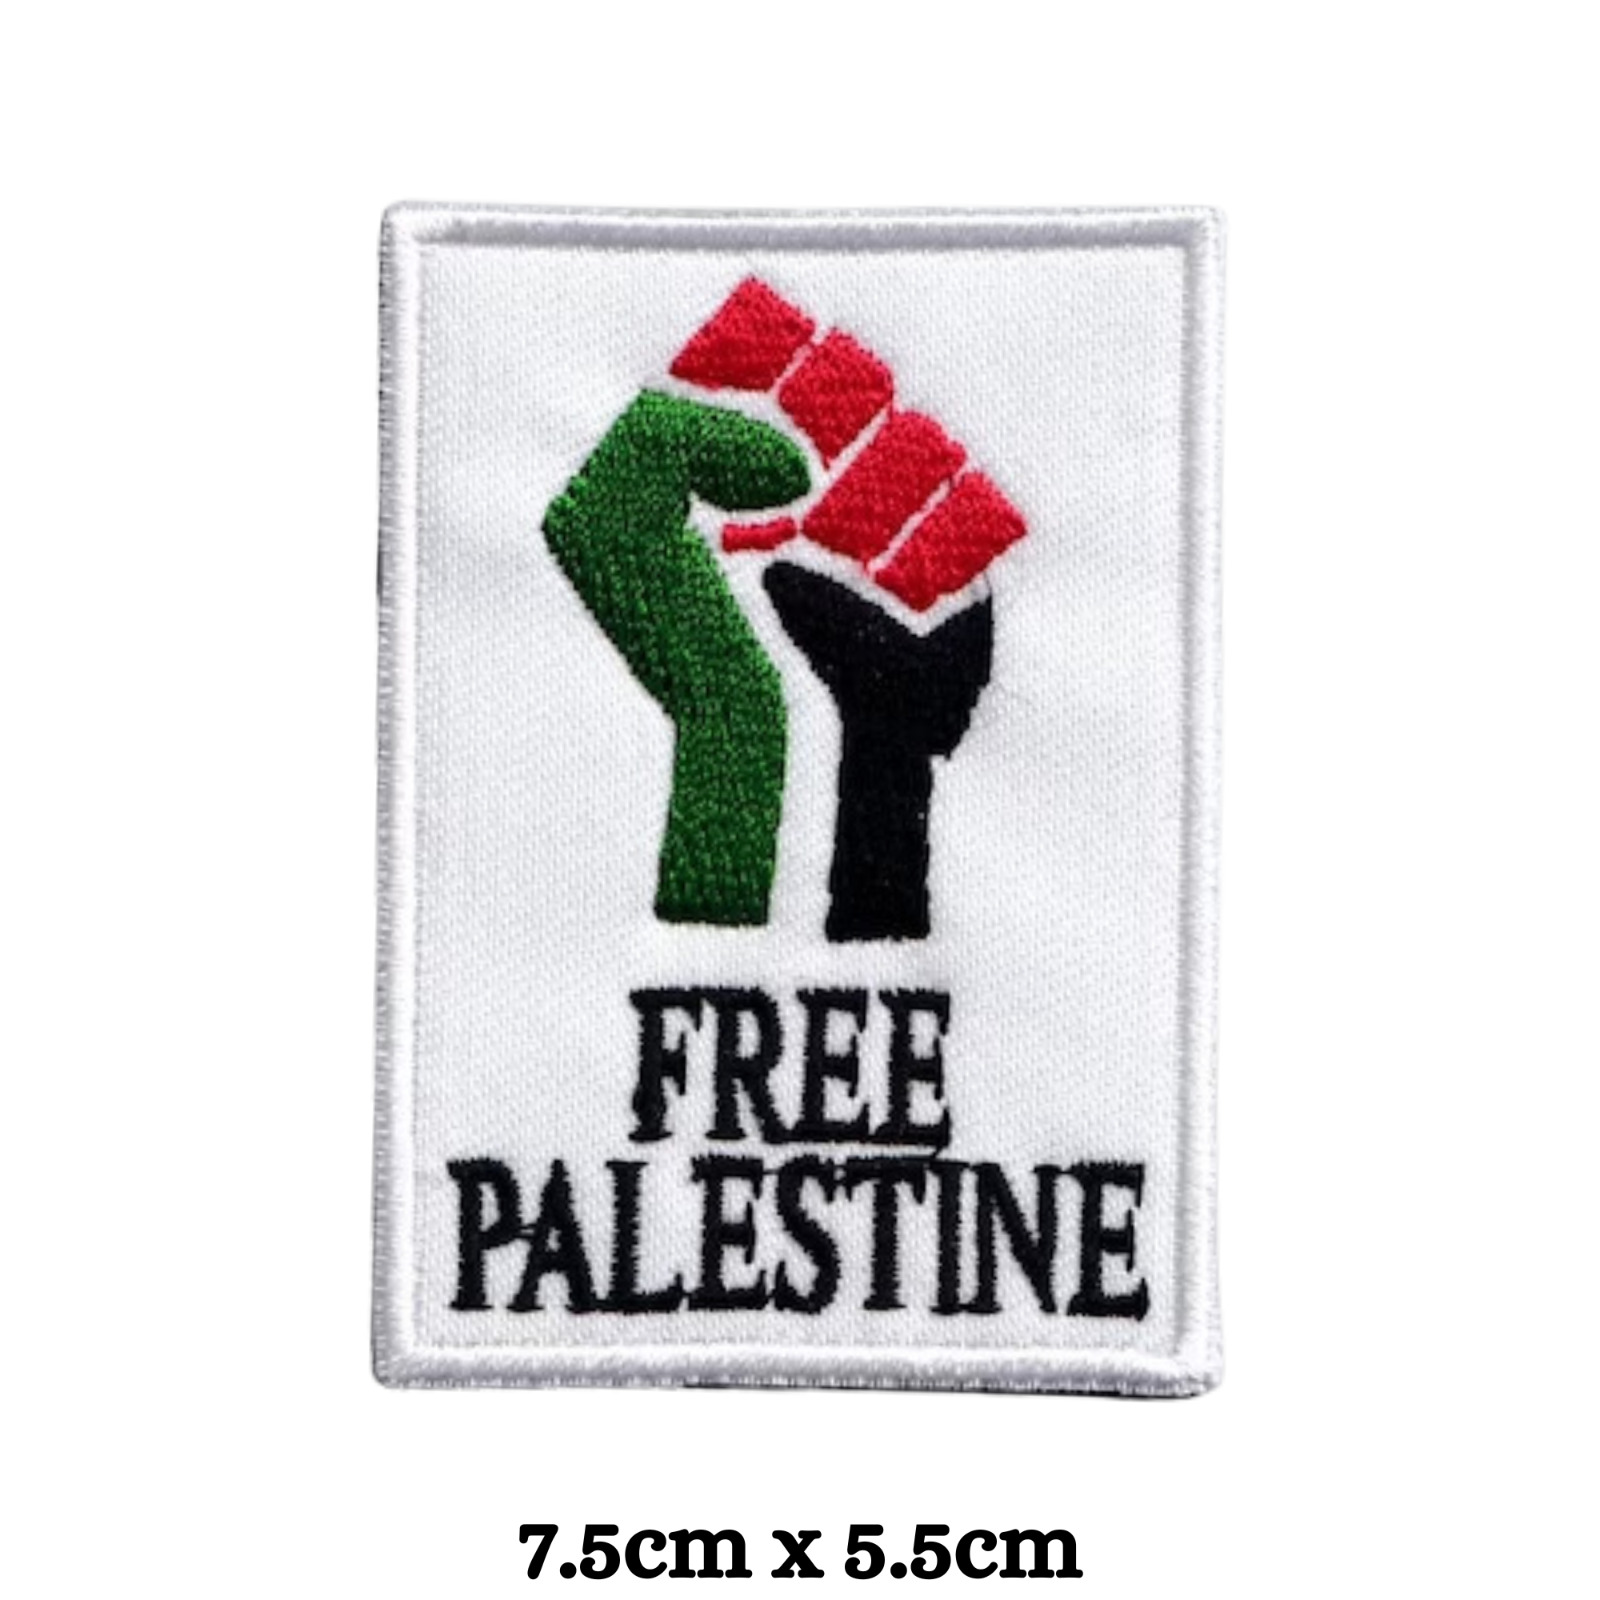 Palestine National flag Iron On patch Embroidered Sew On Free Palestine badges